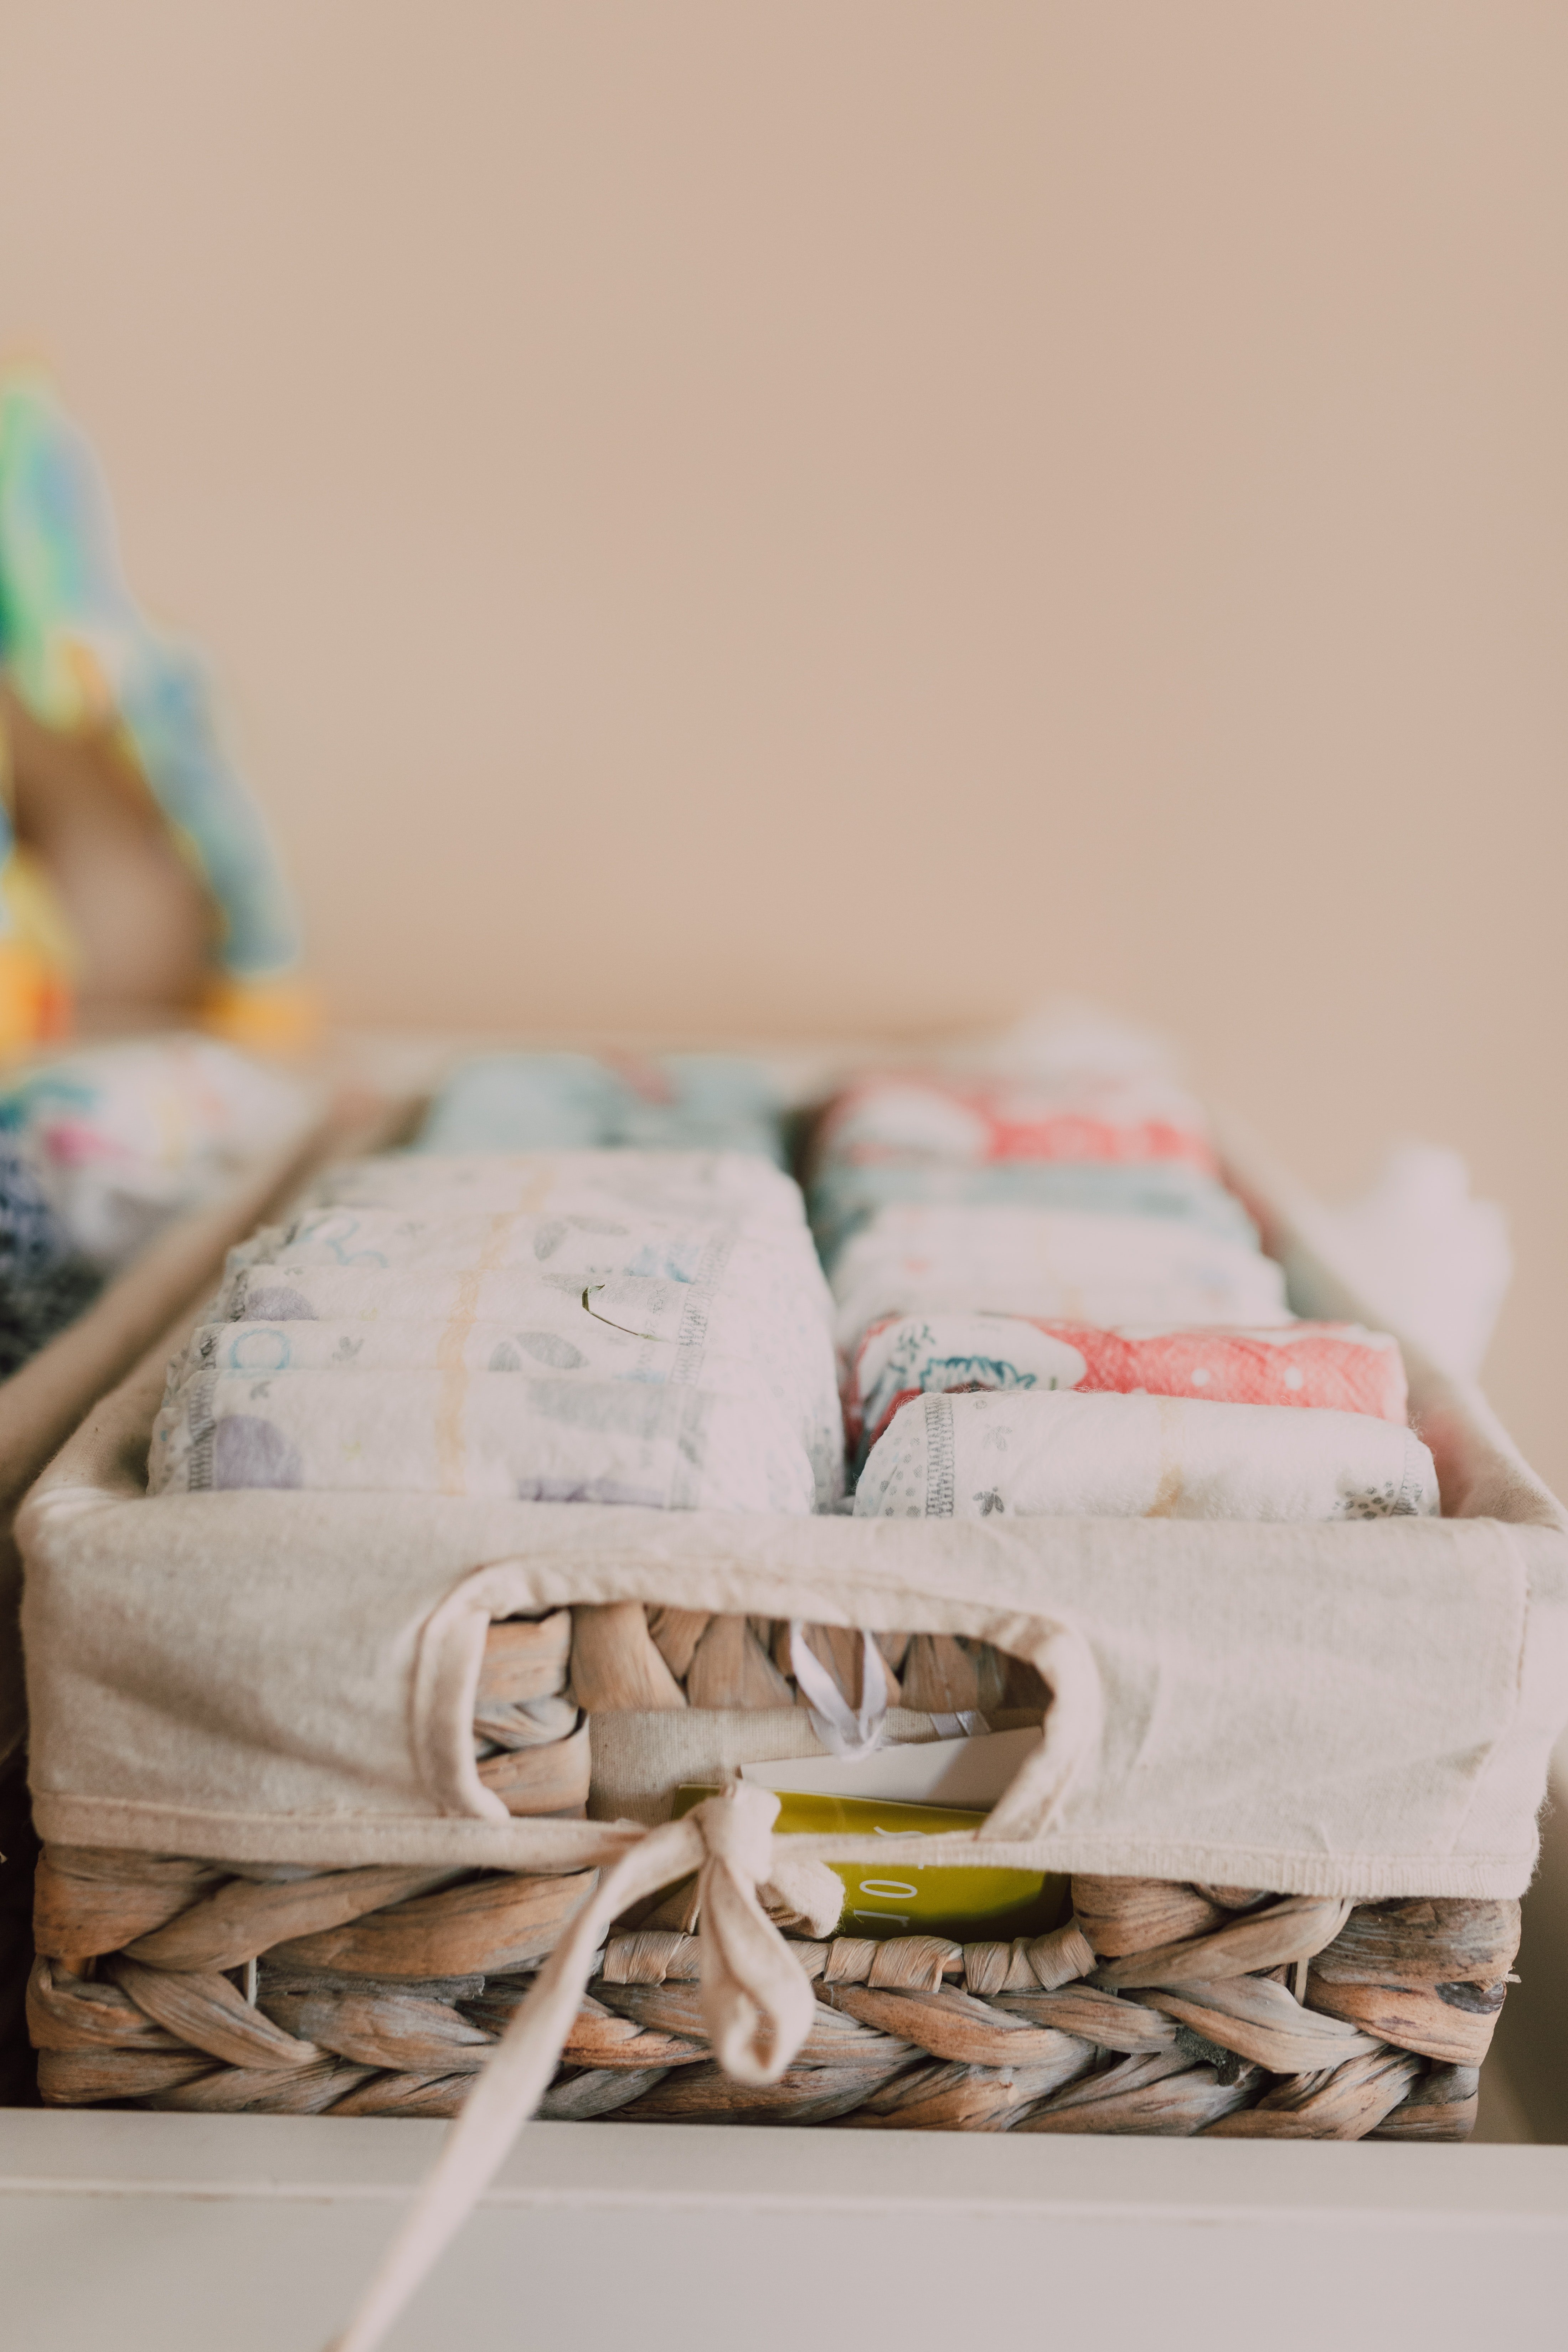 Joanna was surprised to see a box of new diapers outside her house. | Source: Pexels